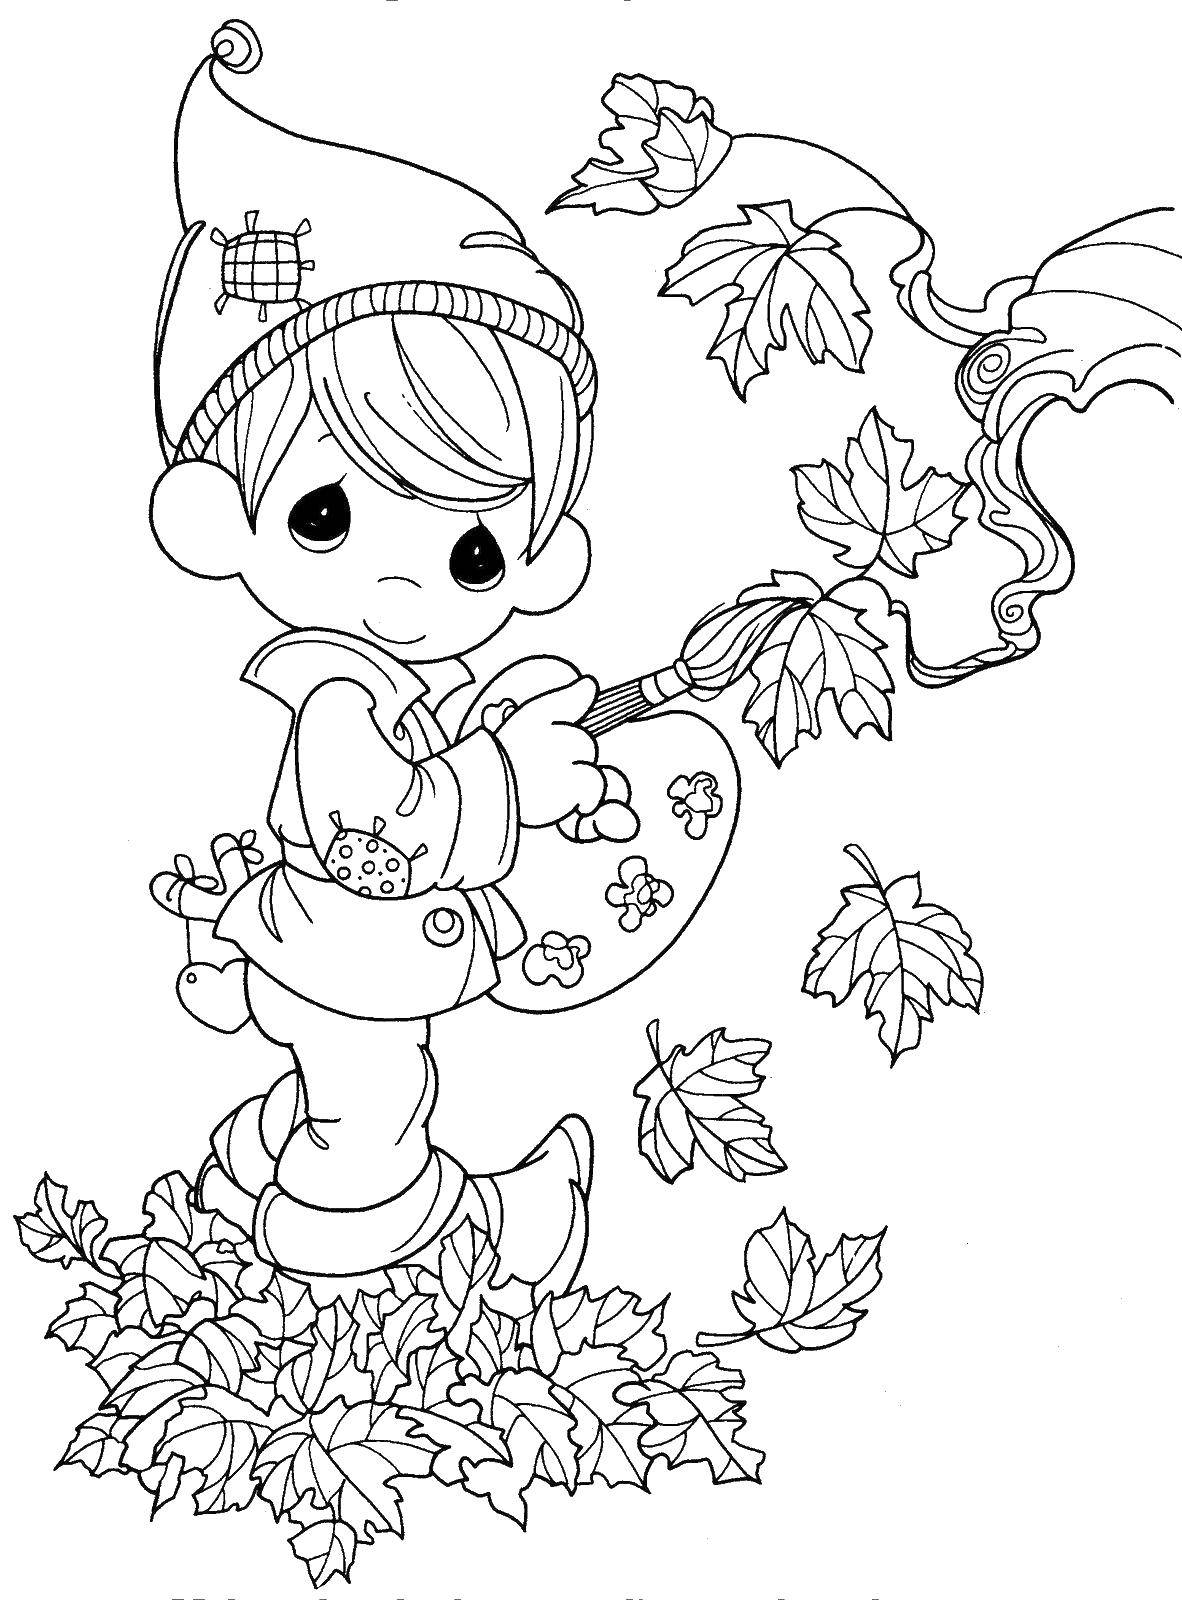 Coloring Leaves. Category Autumn leaves falling. Tags:  sheets , boy, fall.